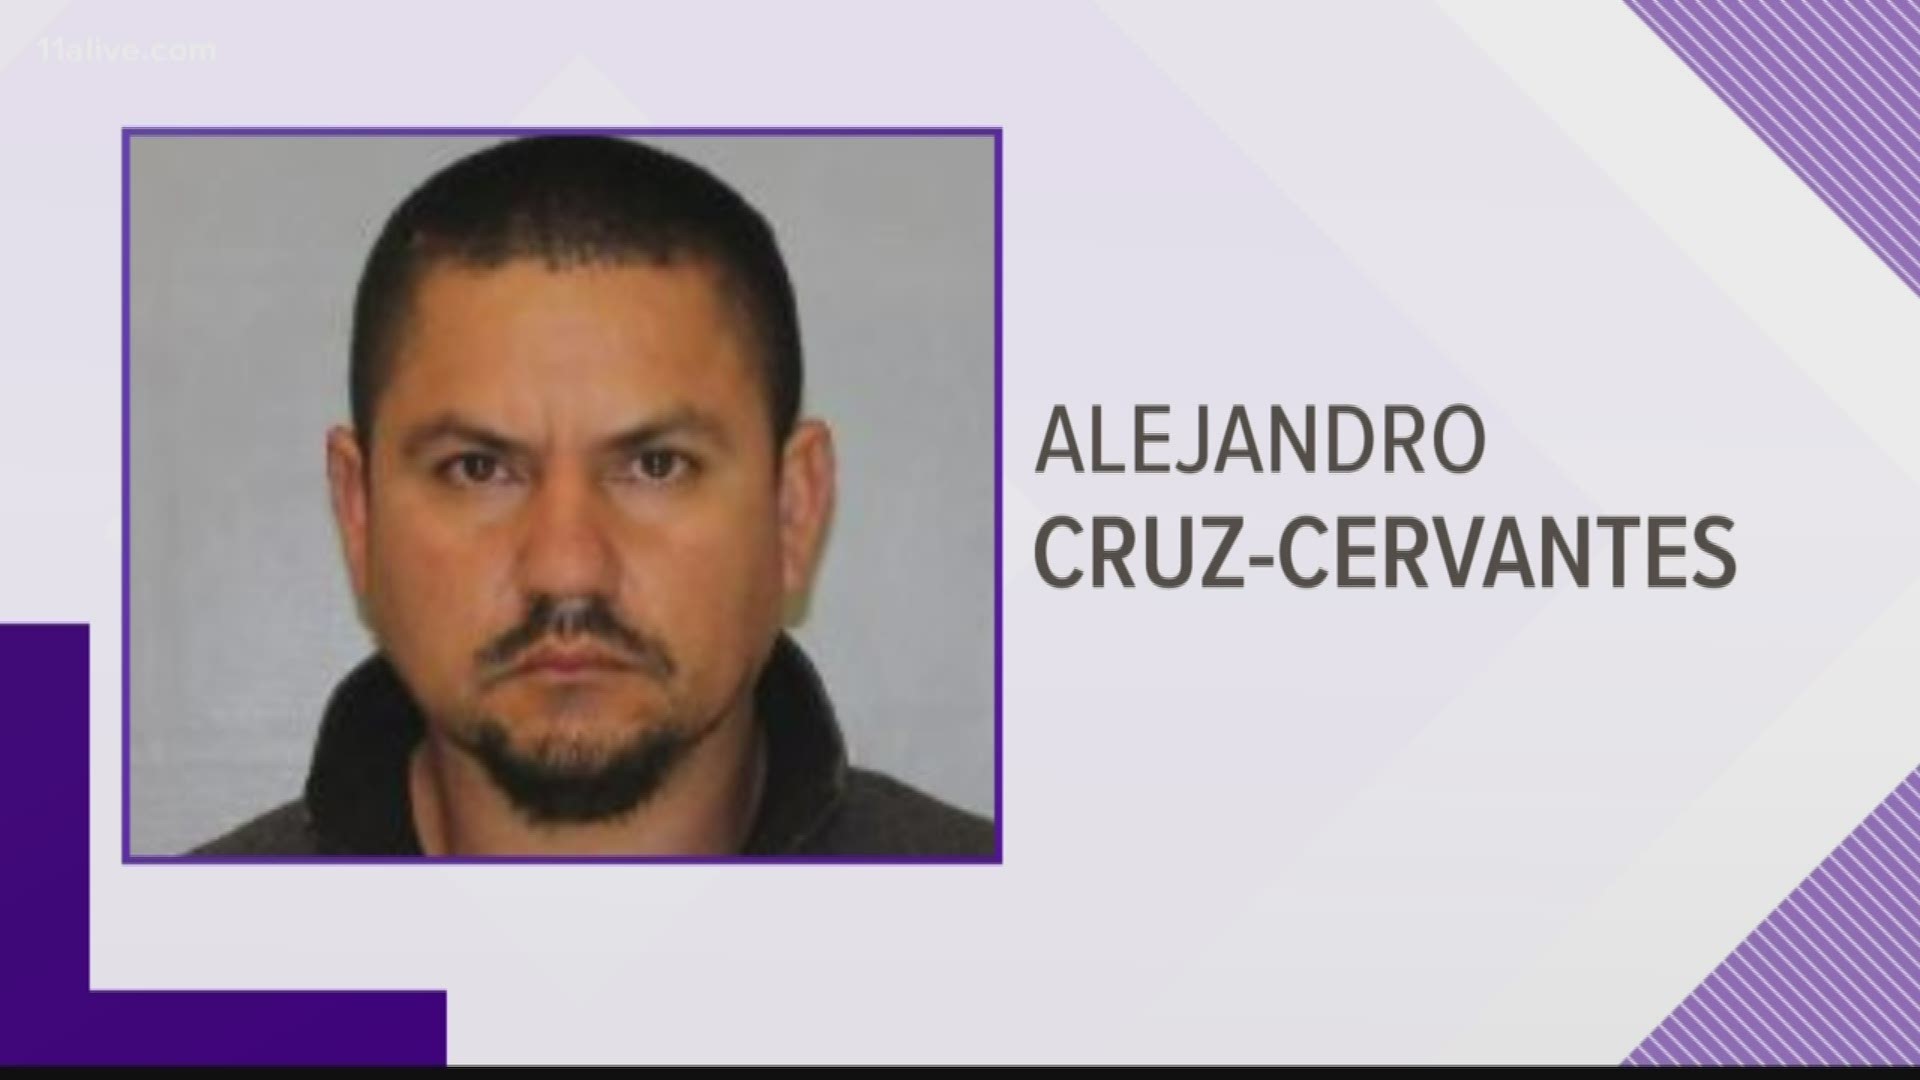 Alejandro Cruz-Cervantes is being charged with reckless endangerment.